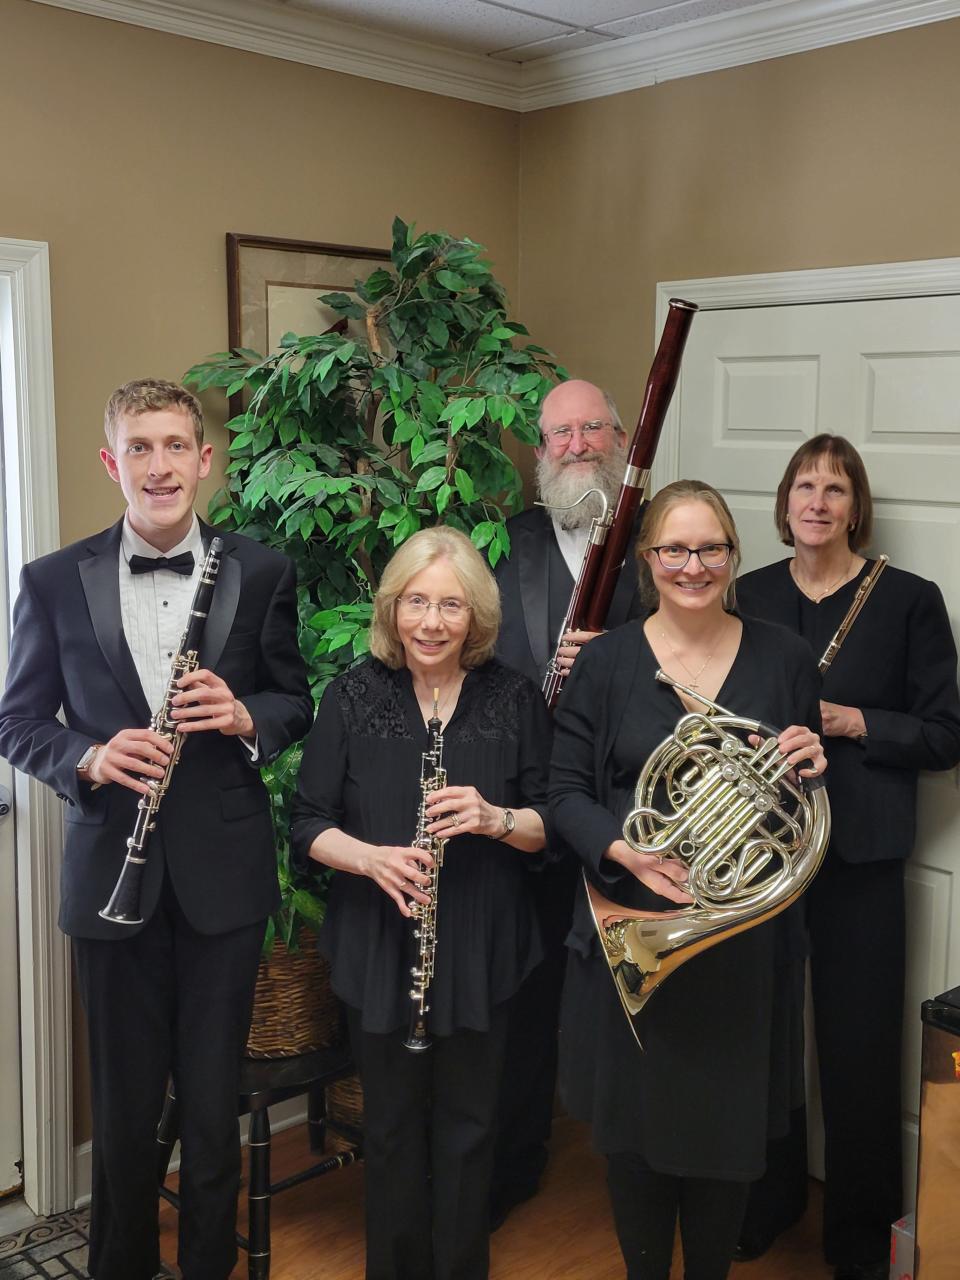 The Secret City Winds players include Barbara Sparks, flute; Noah Hylton, clarinet; Cyndi Jeffers, oboe; Lee Robertson, bassoon, and Beth Platfoot, horn.